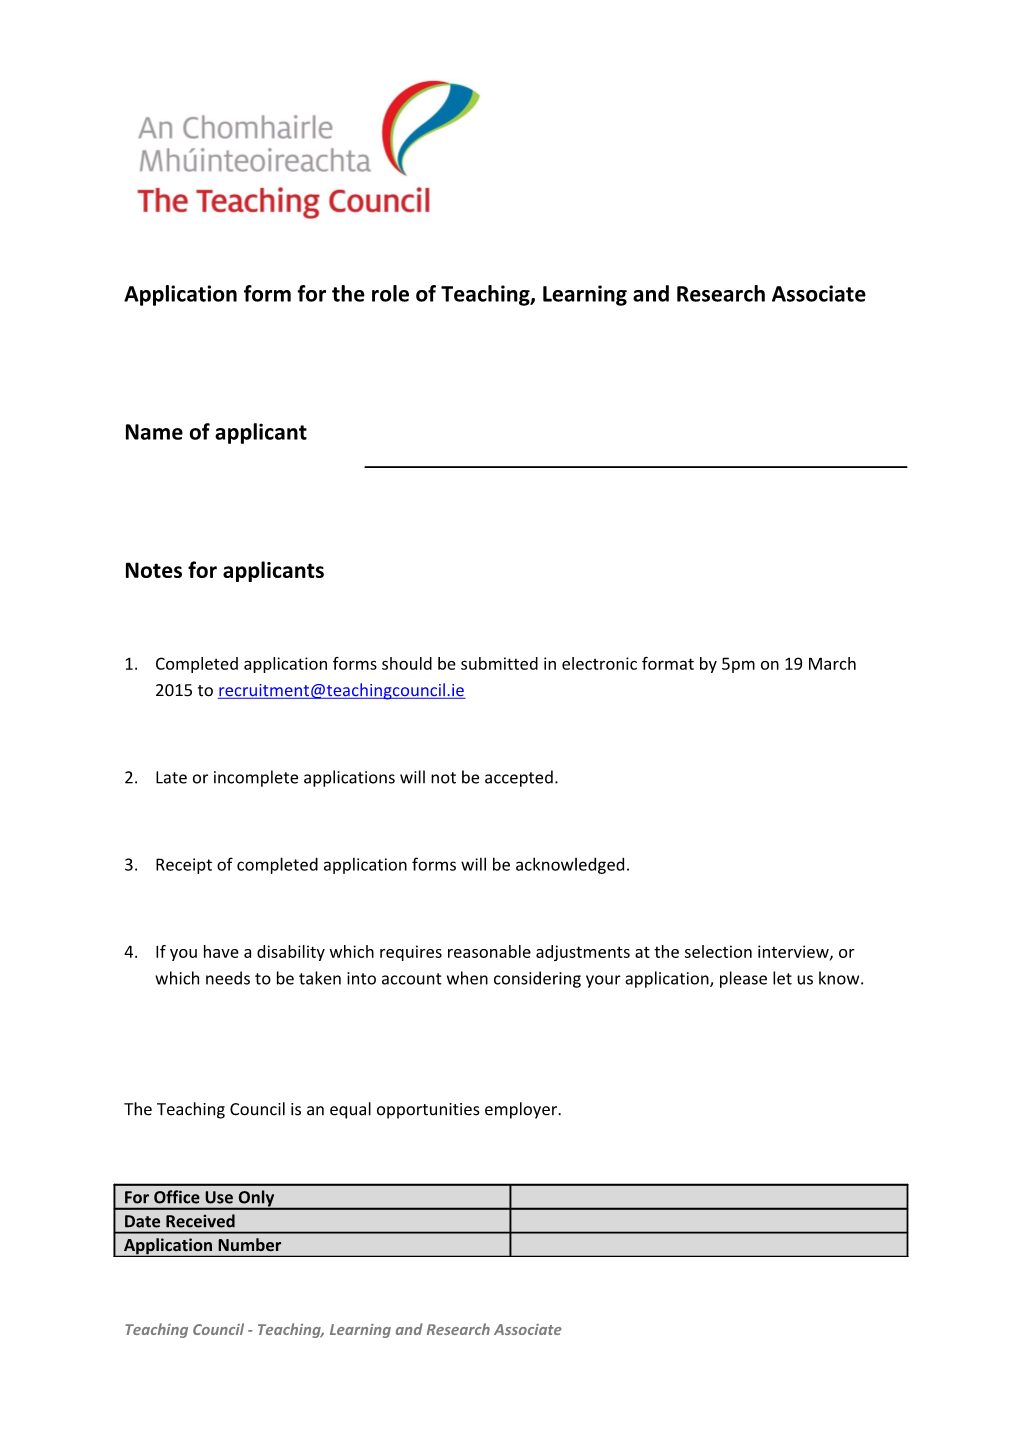 Application Form for the Role of Teaching, Learning and Research Associate